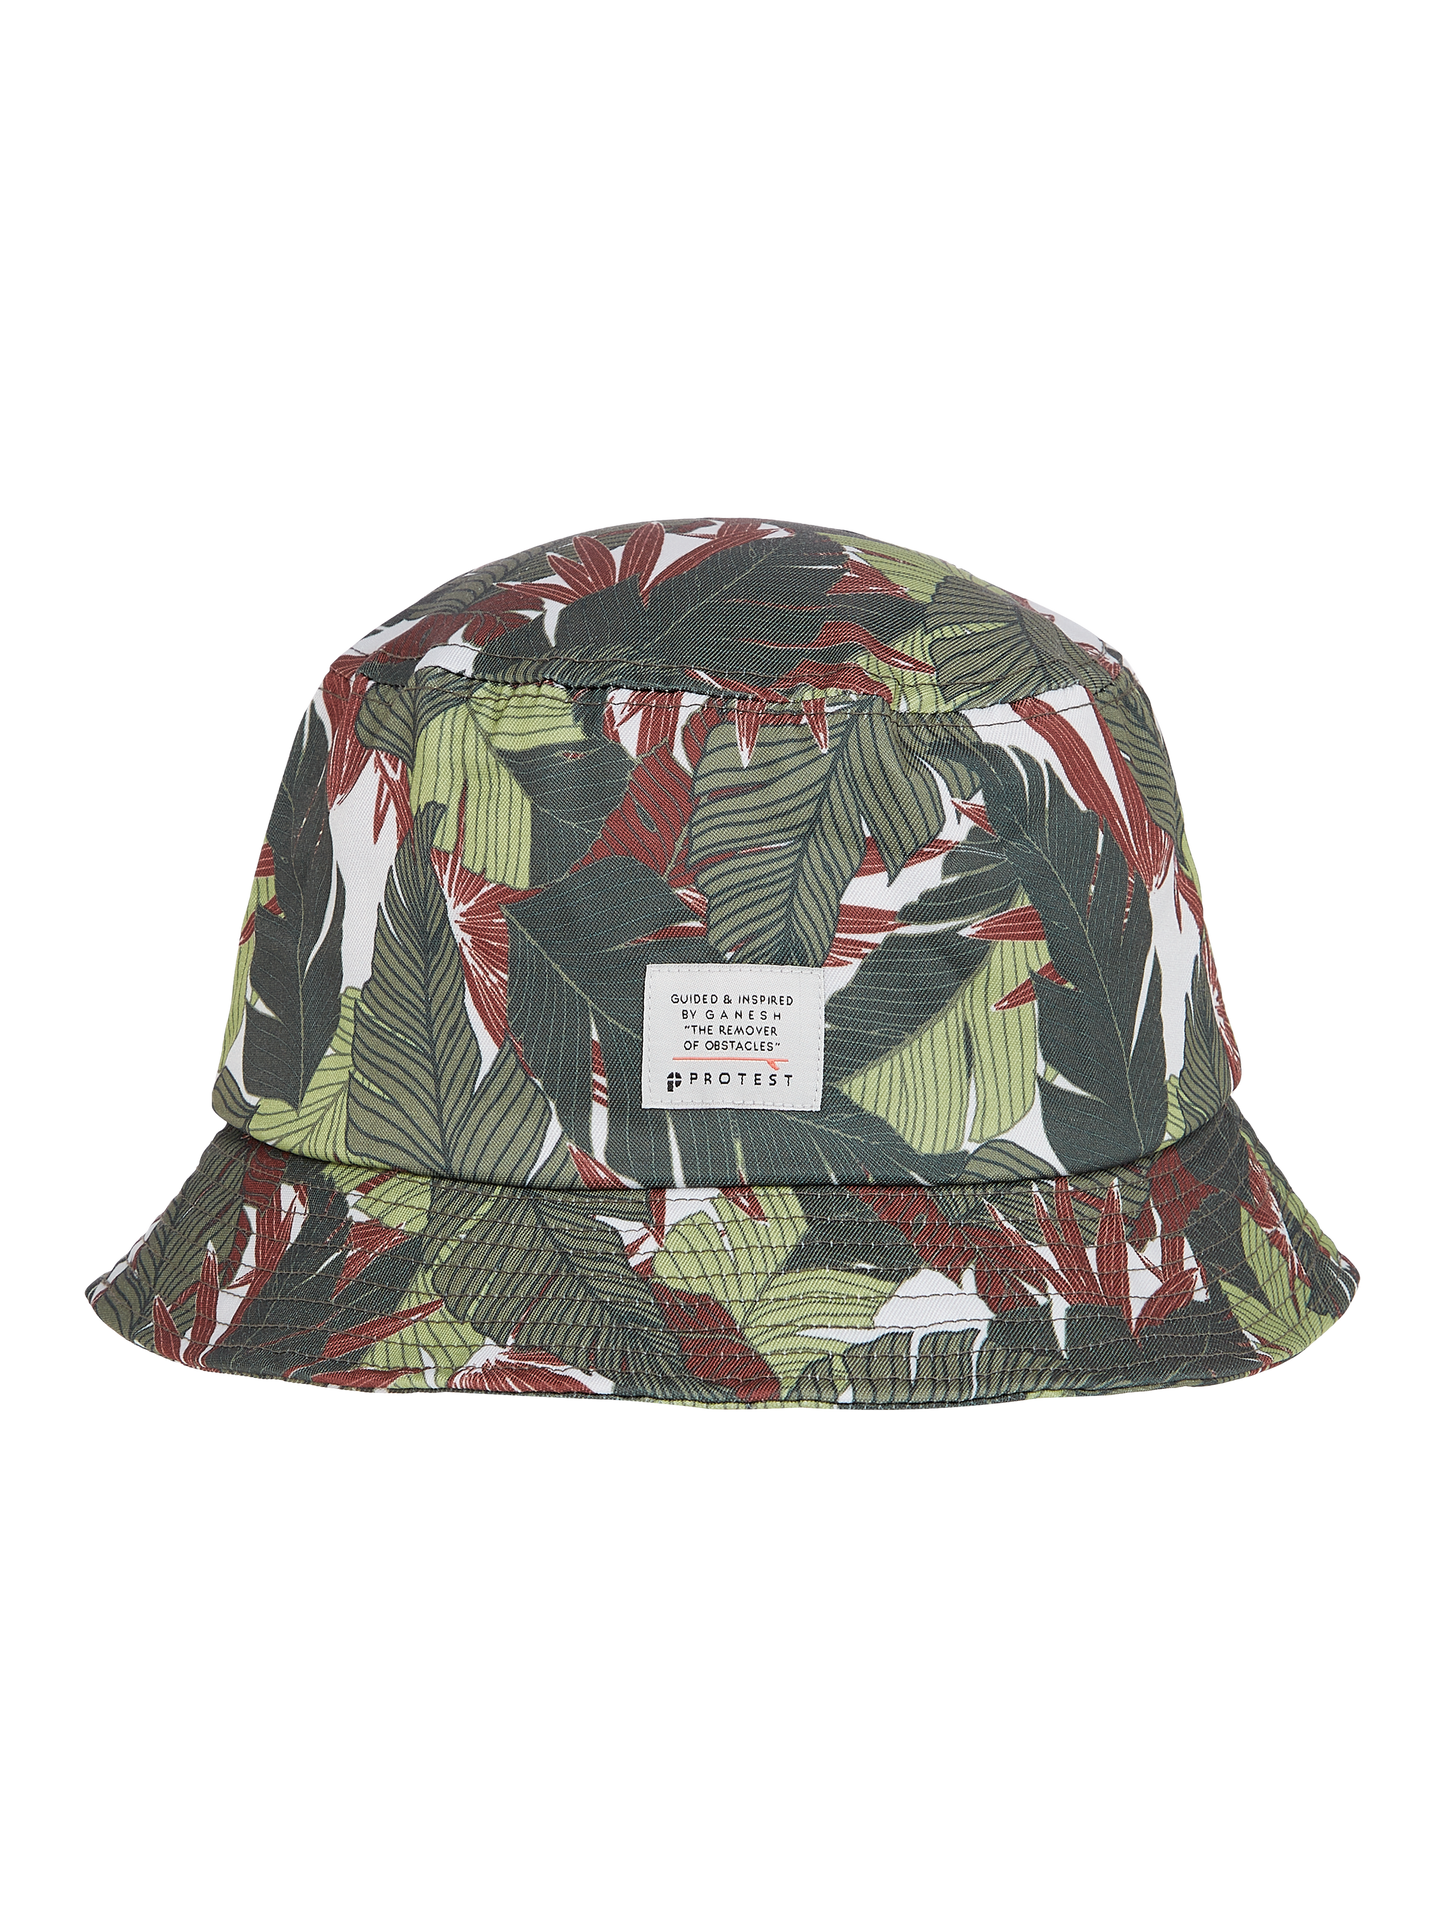 Protest Noronha Hat in Green